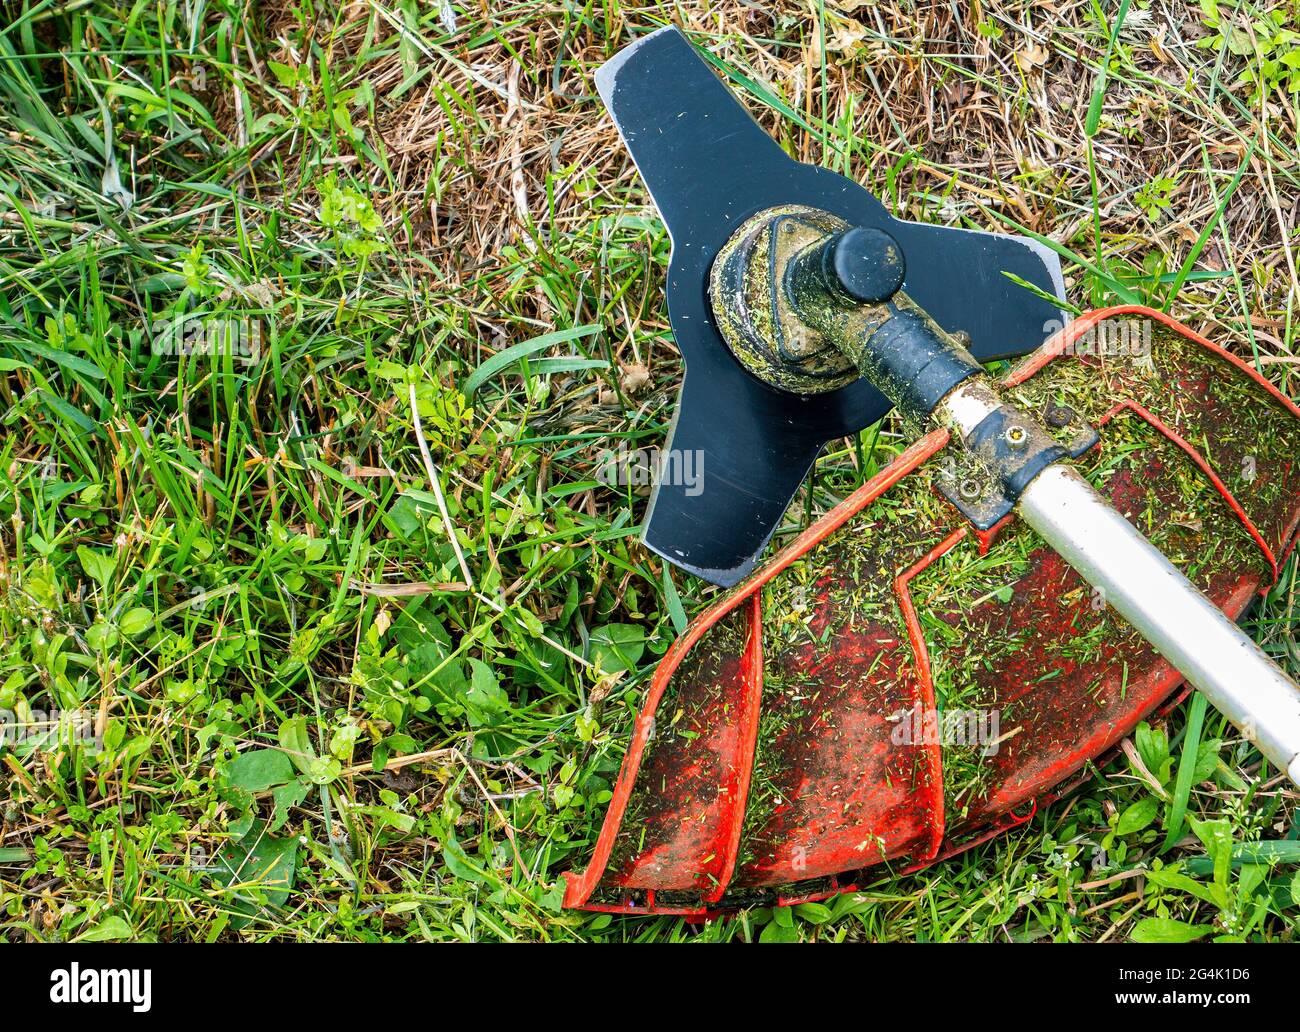 Lawn mower cutting disc for lawn mowing. Blade of knife. Trimmer cutting disc. Mow the grass with a lawn mower. Safety precautions. Garden equipment. Stock Photo